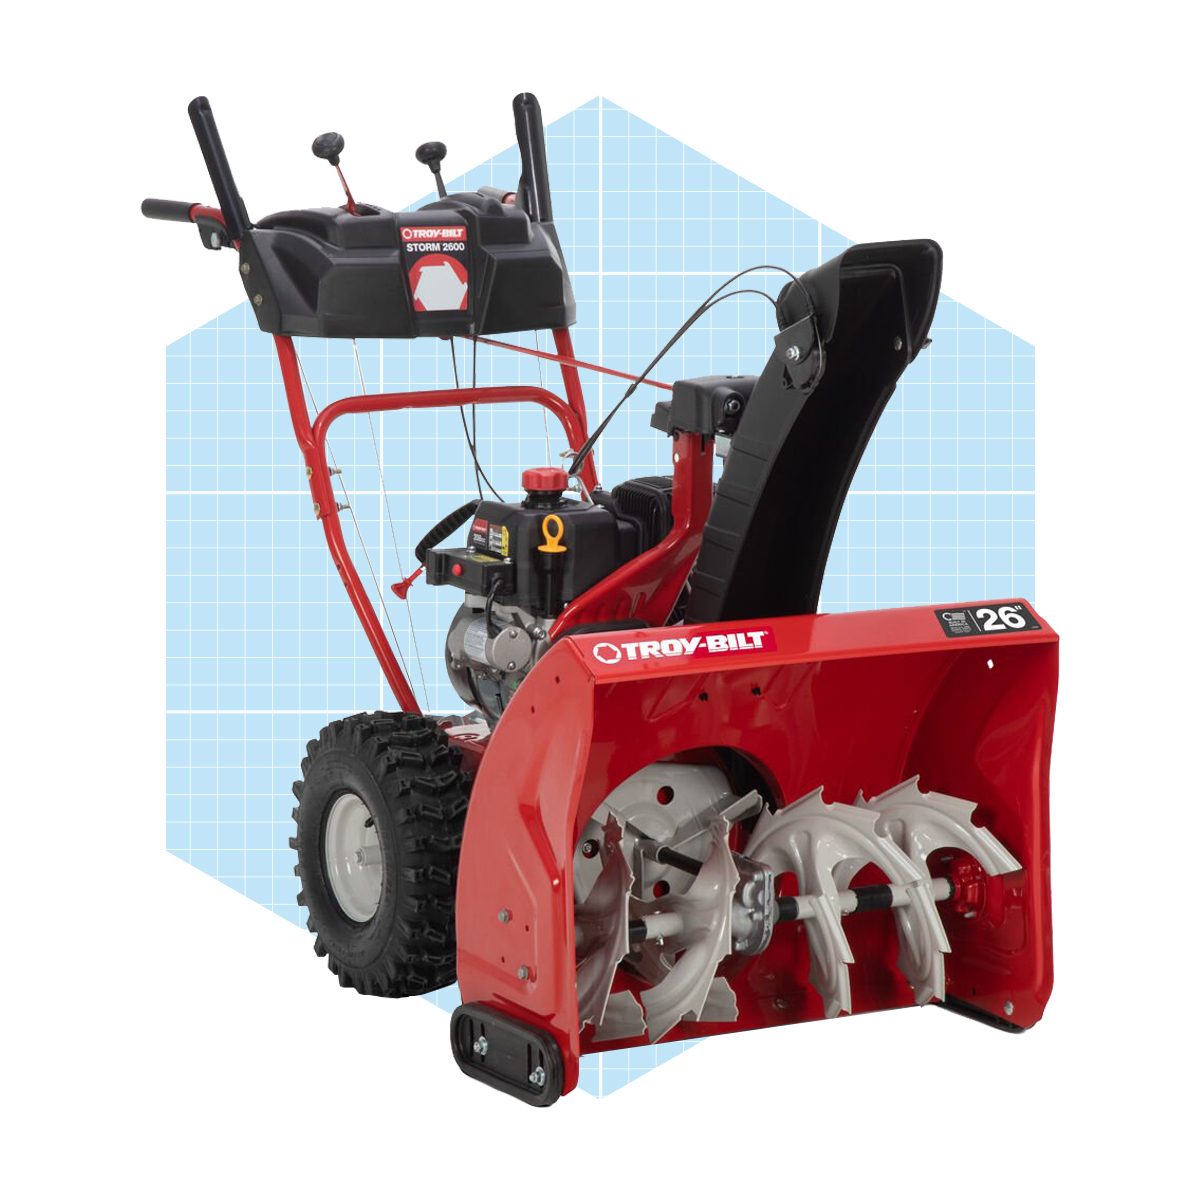 Troy Bilt Storm Two Stage Gas Snow Blower With Electric Start Self Propelled Ecomm Walmart.com